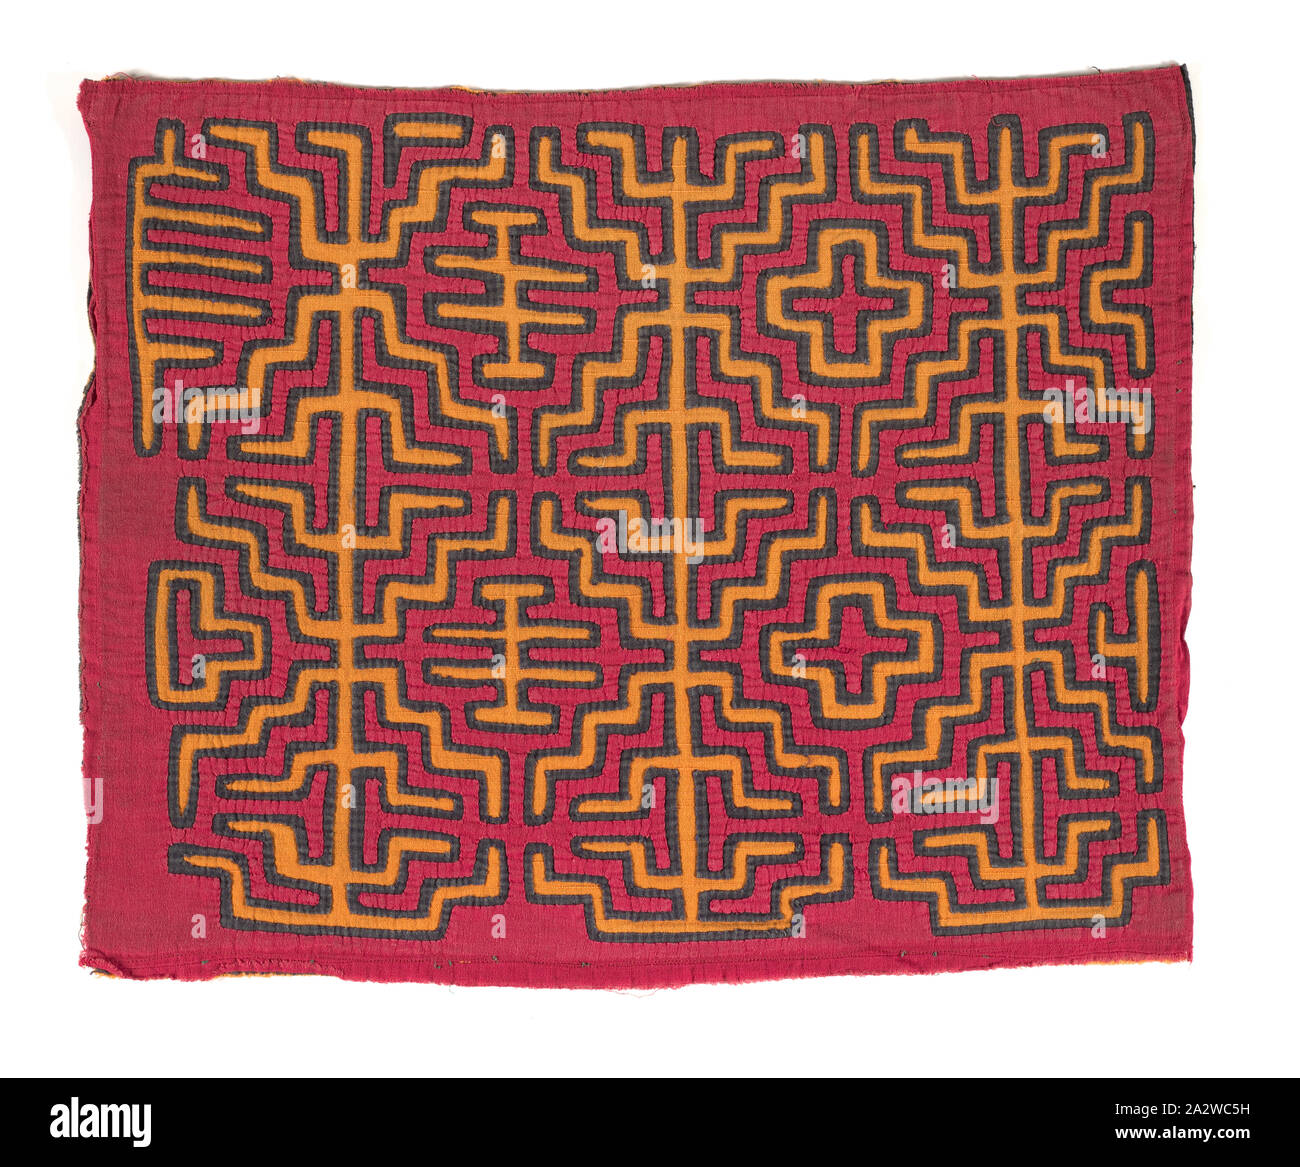 shirt panel (mola), Kuna people, about 1950s, appliqued cotton, 15-3/4 x 19-5/8 in., Textile and Fashion Arts Stock Photo